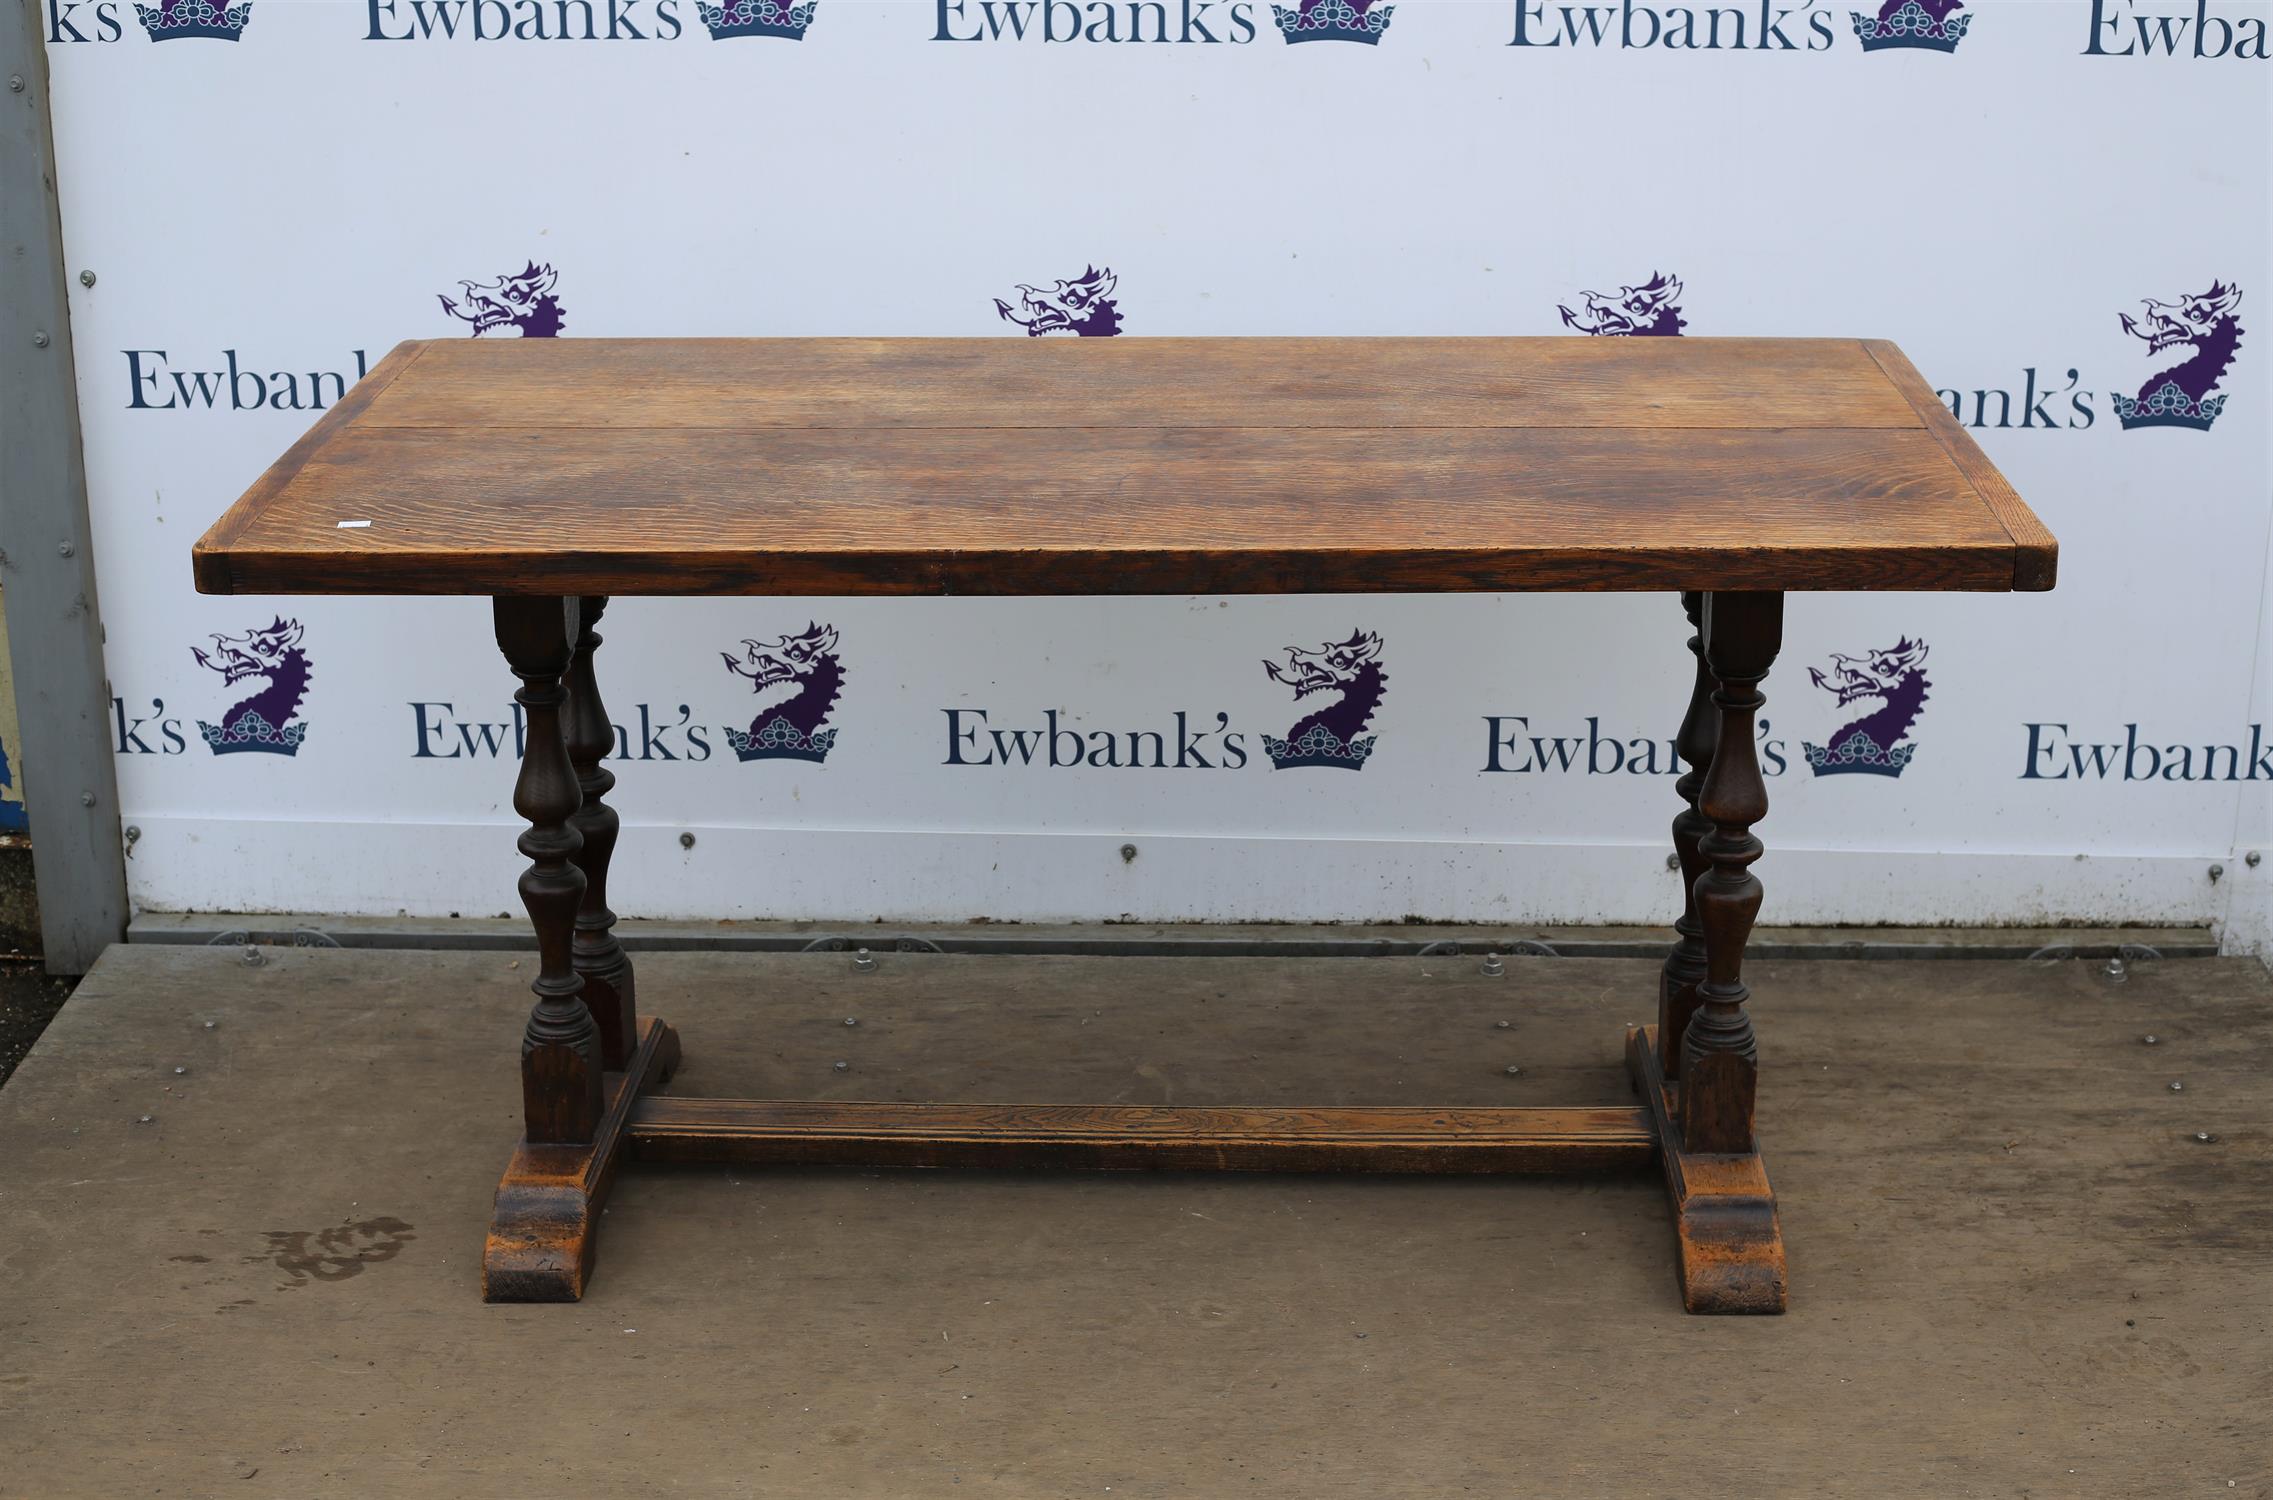 Reproduction oak refectory table, two plank top on end supports with uniting stretcher,